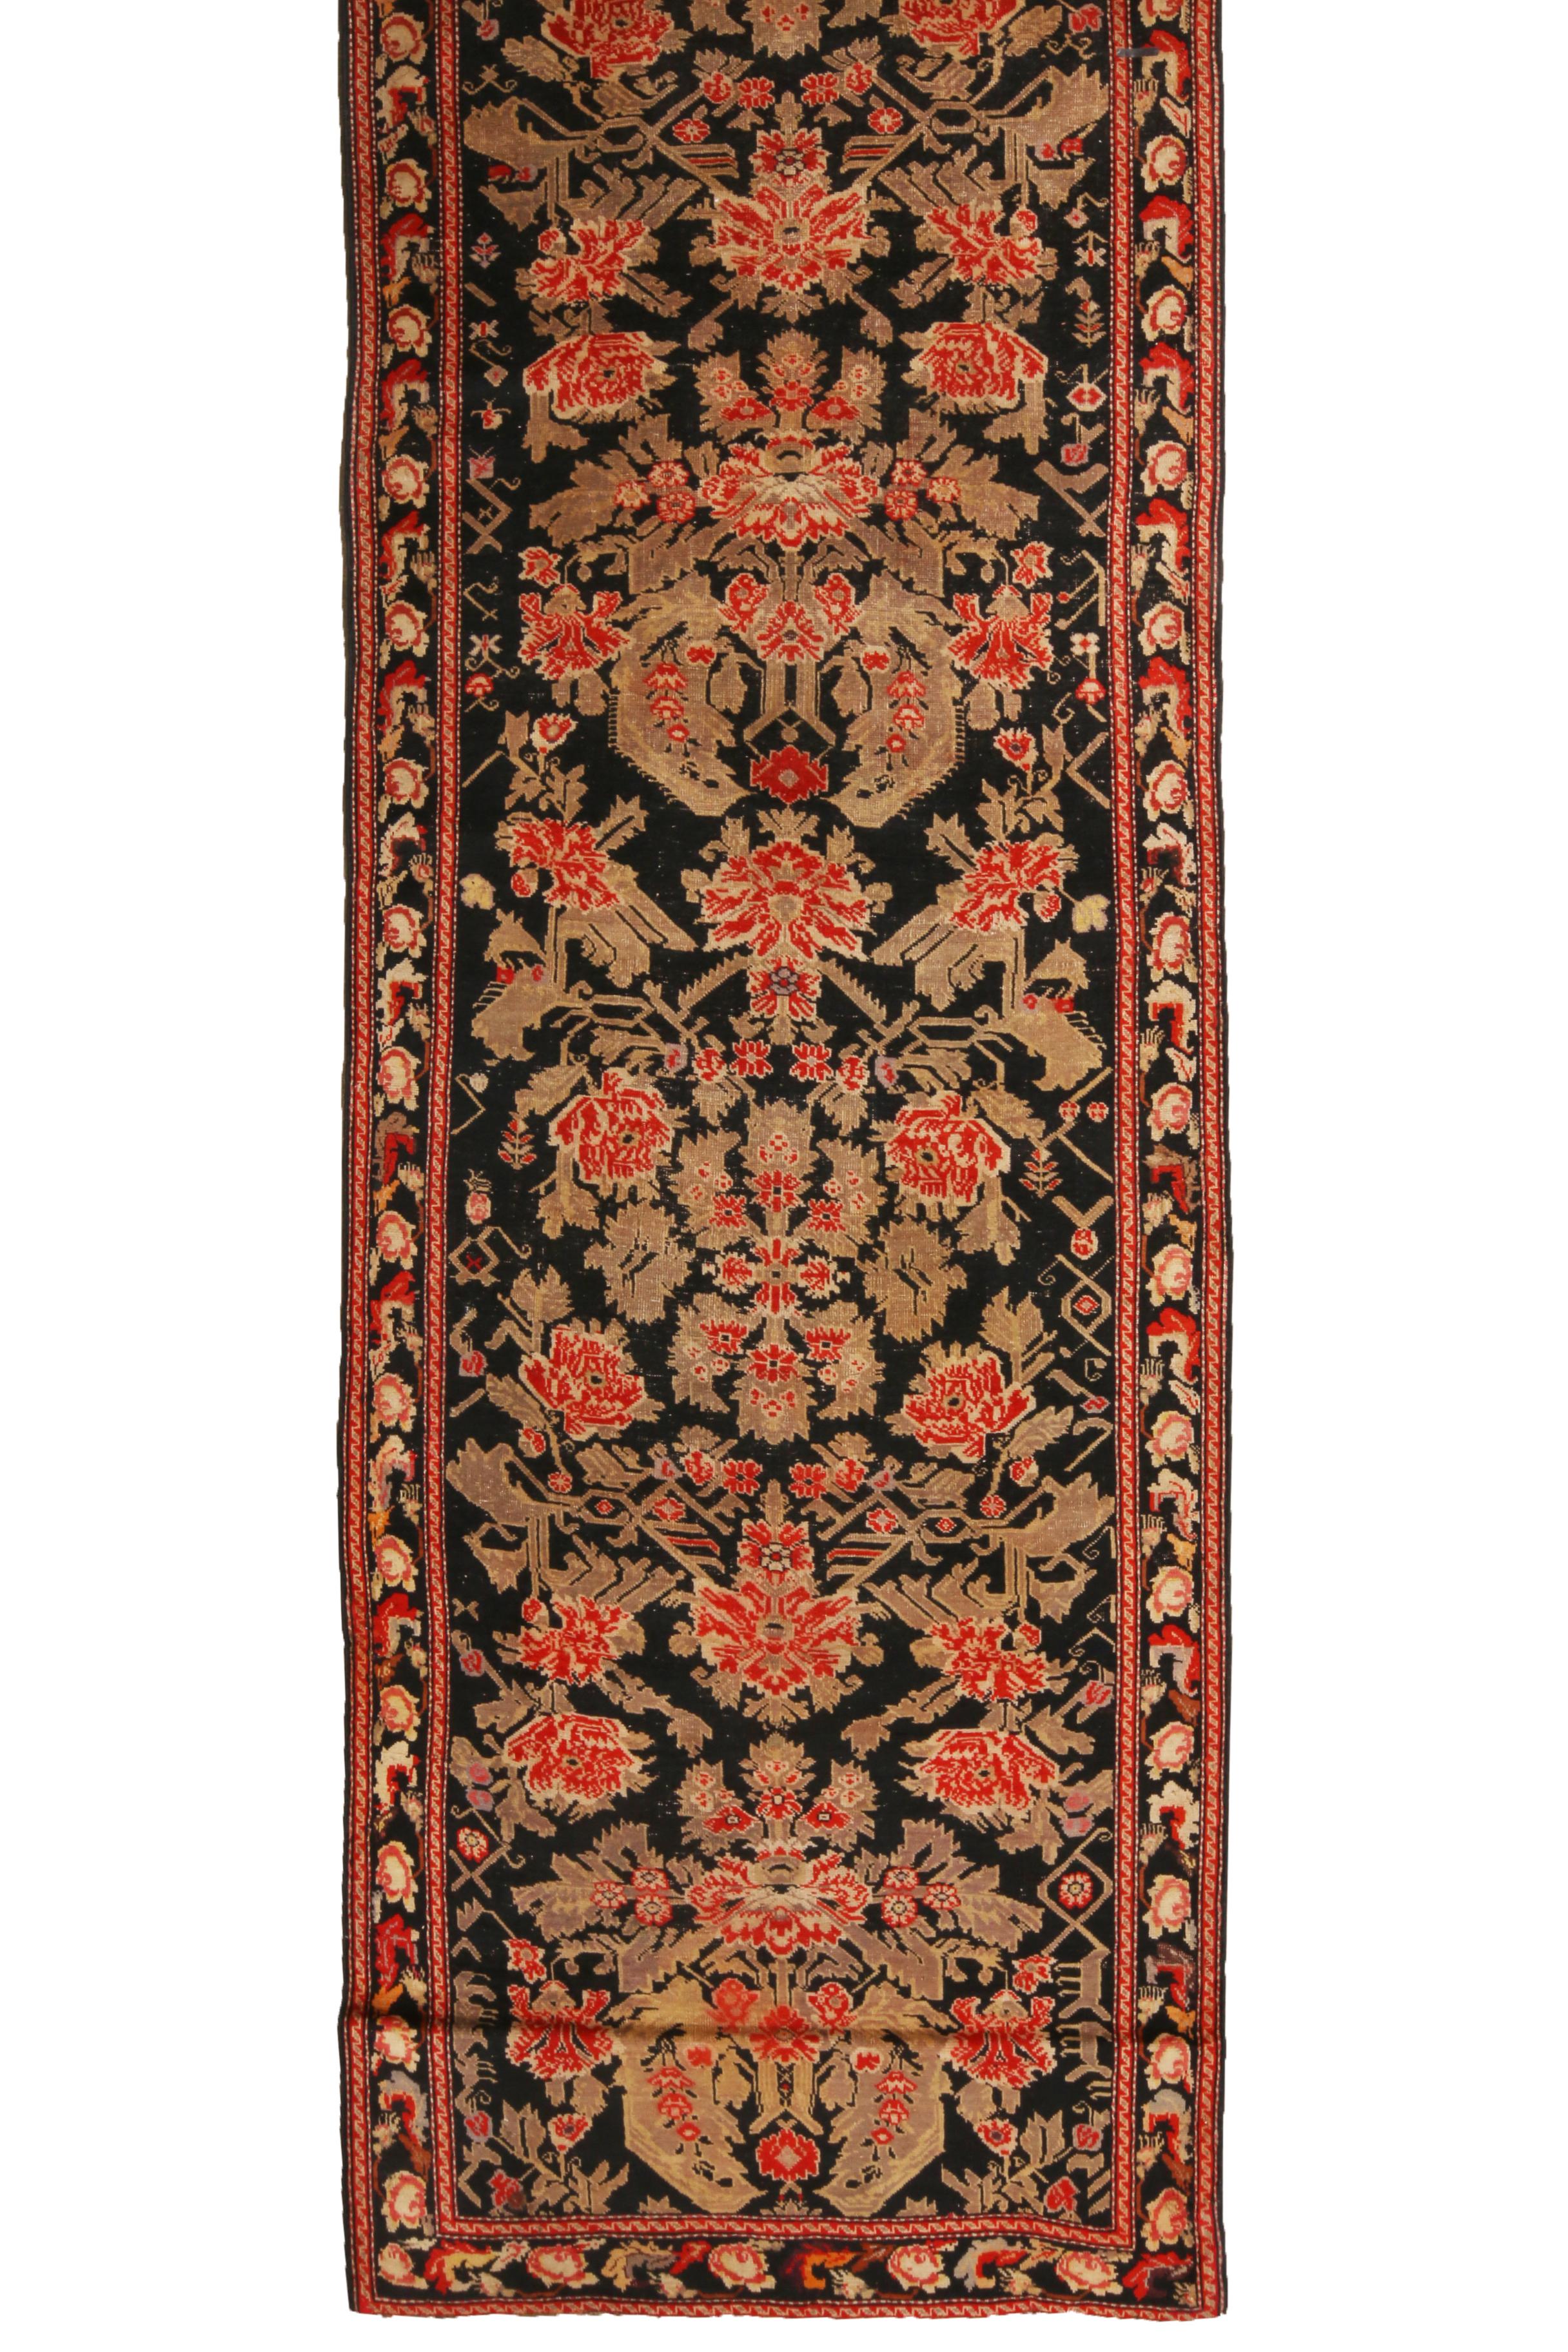 Originating from Russia in 1900, this hand knotted antique Karabagh Persian runner features high quality wool and a unique colorway. Though the finely woven guard, central, and innermost borders wrap the runner with un-betrayed repetition, the